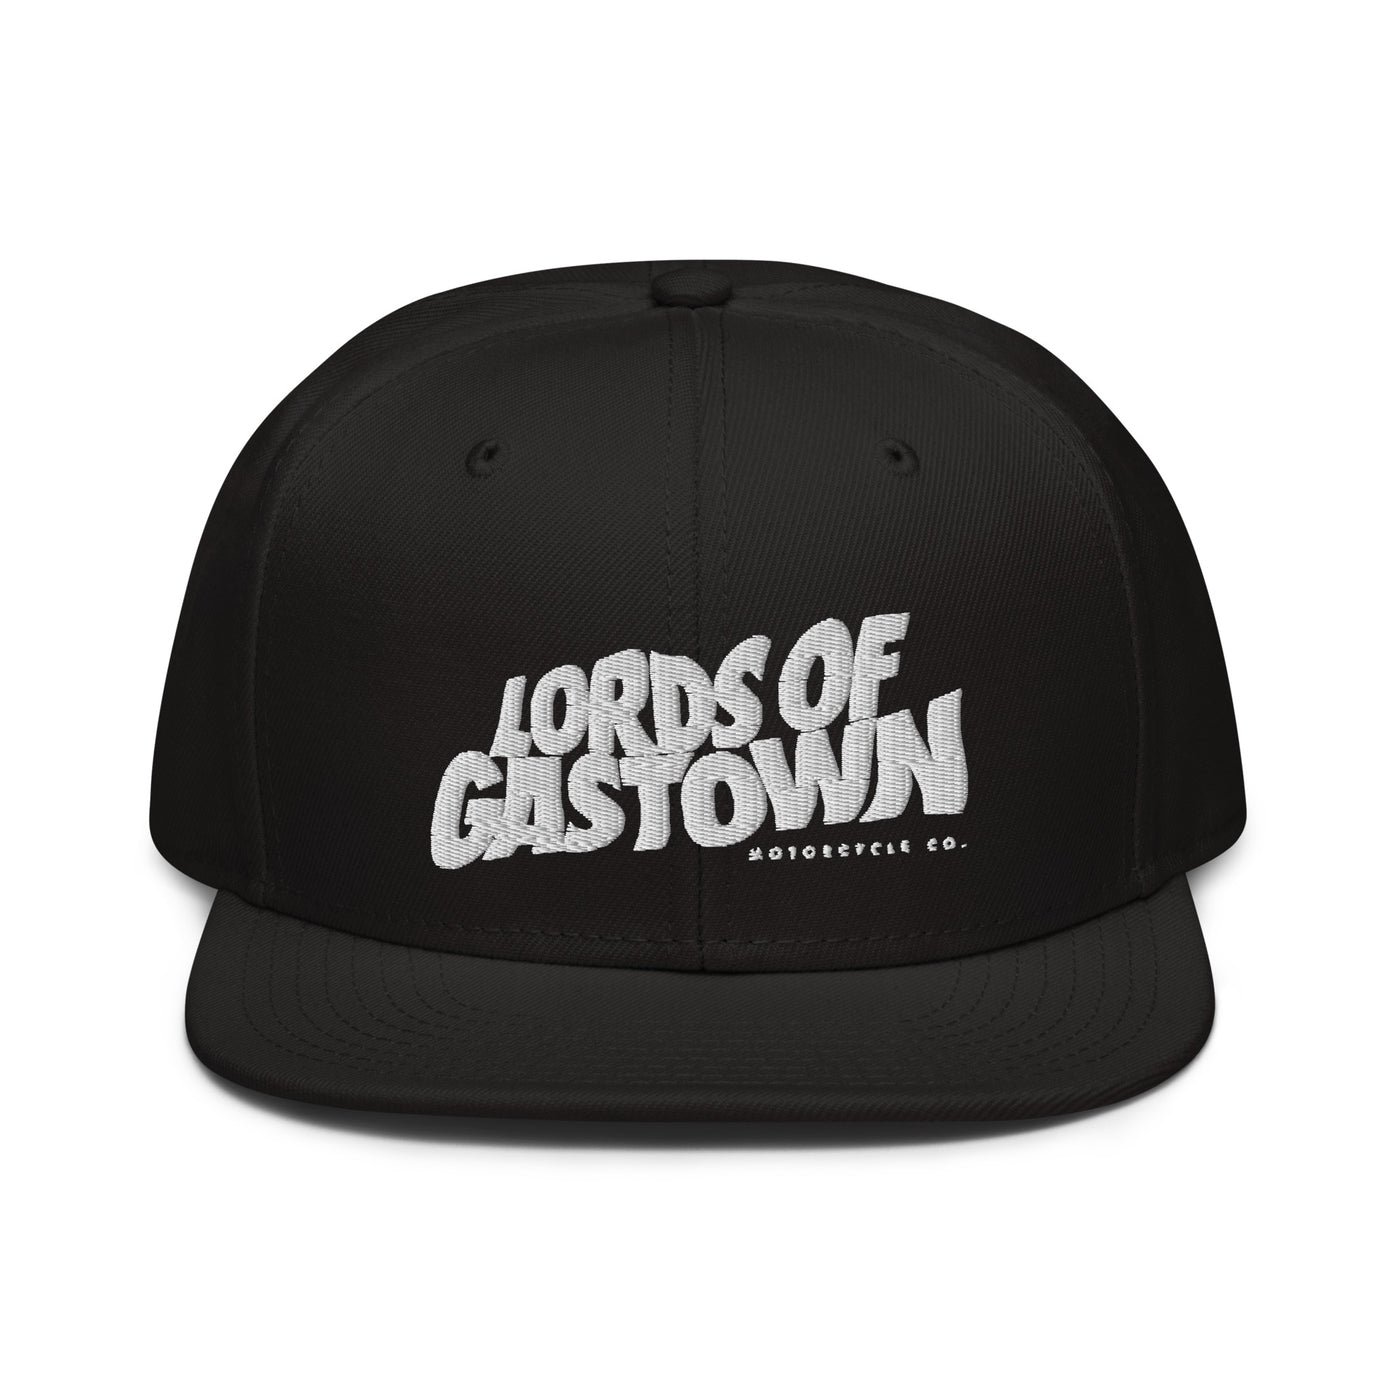 Masters of the Road Embroidered Hat